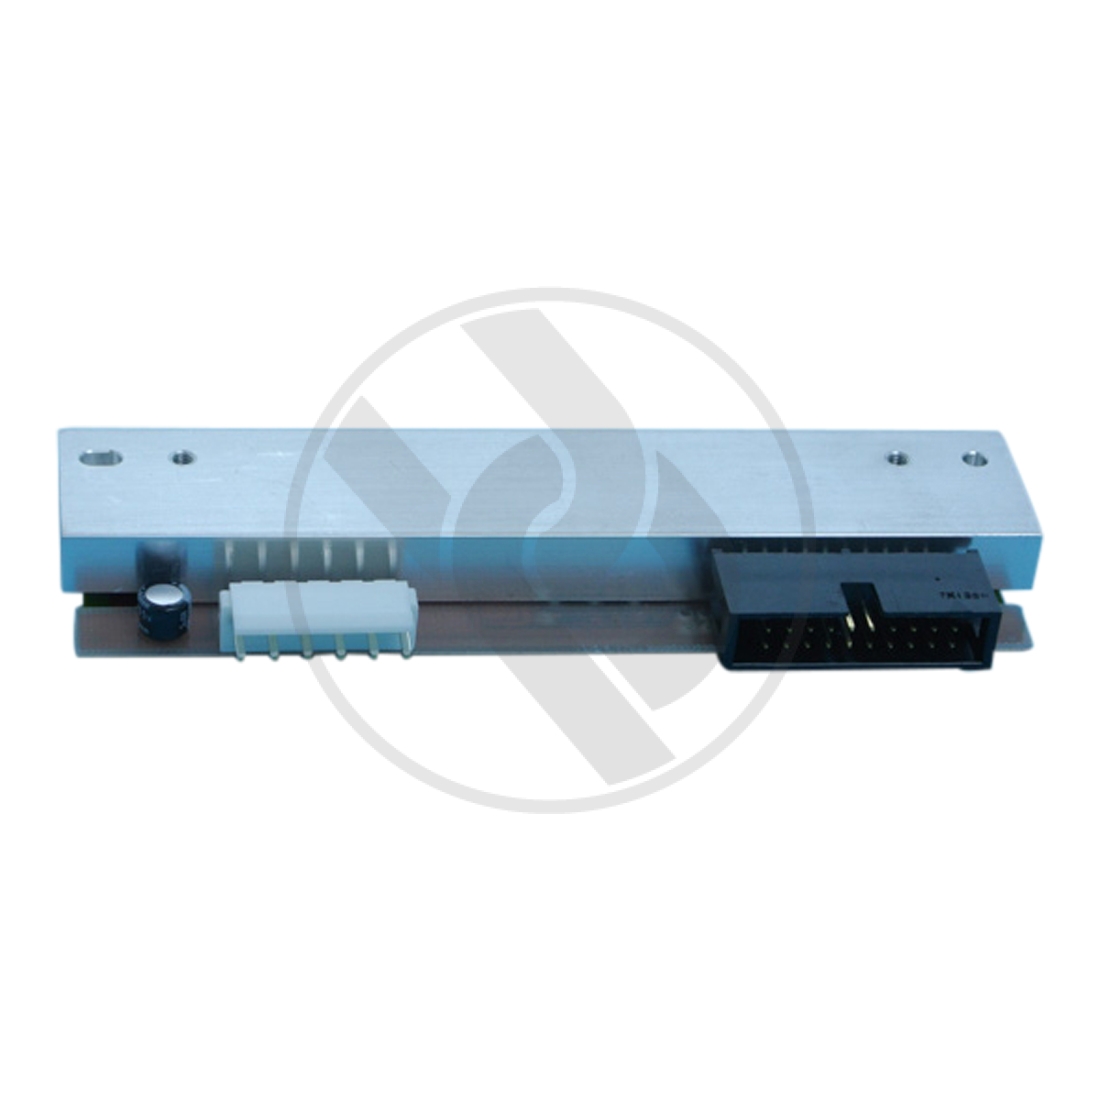 Thermal printhead, 98915, for Avery/Novexx 98915